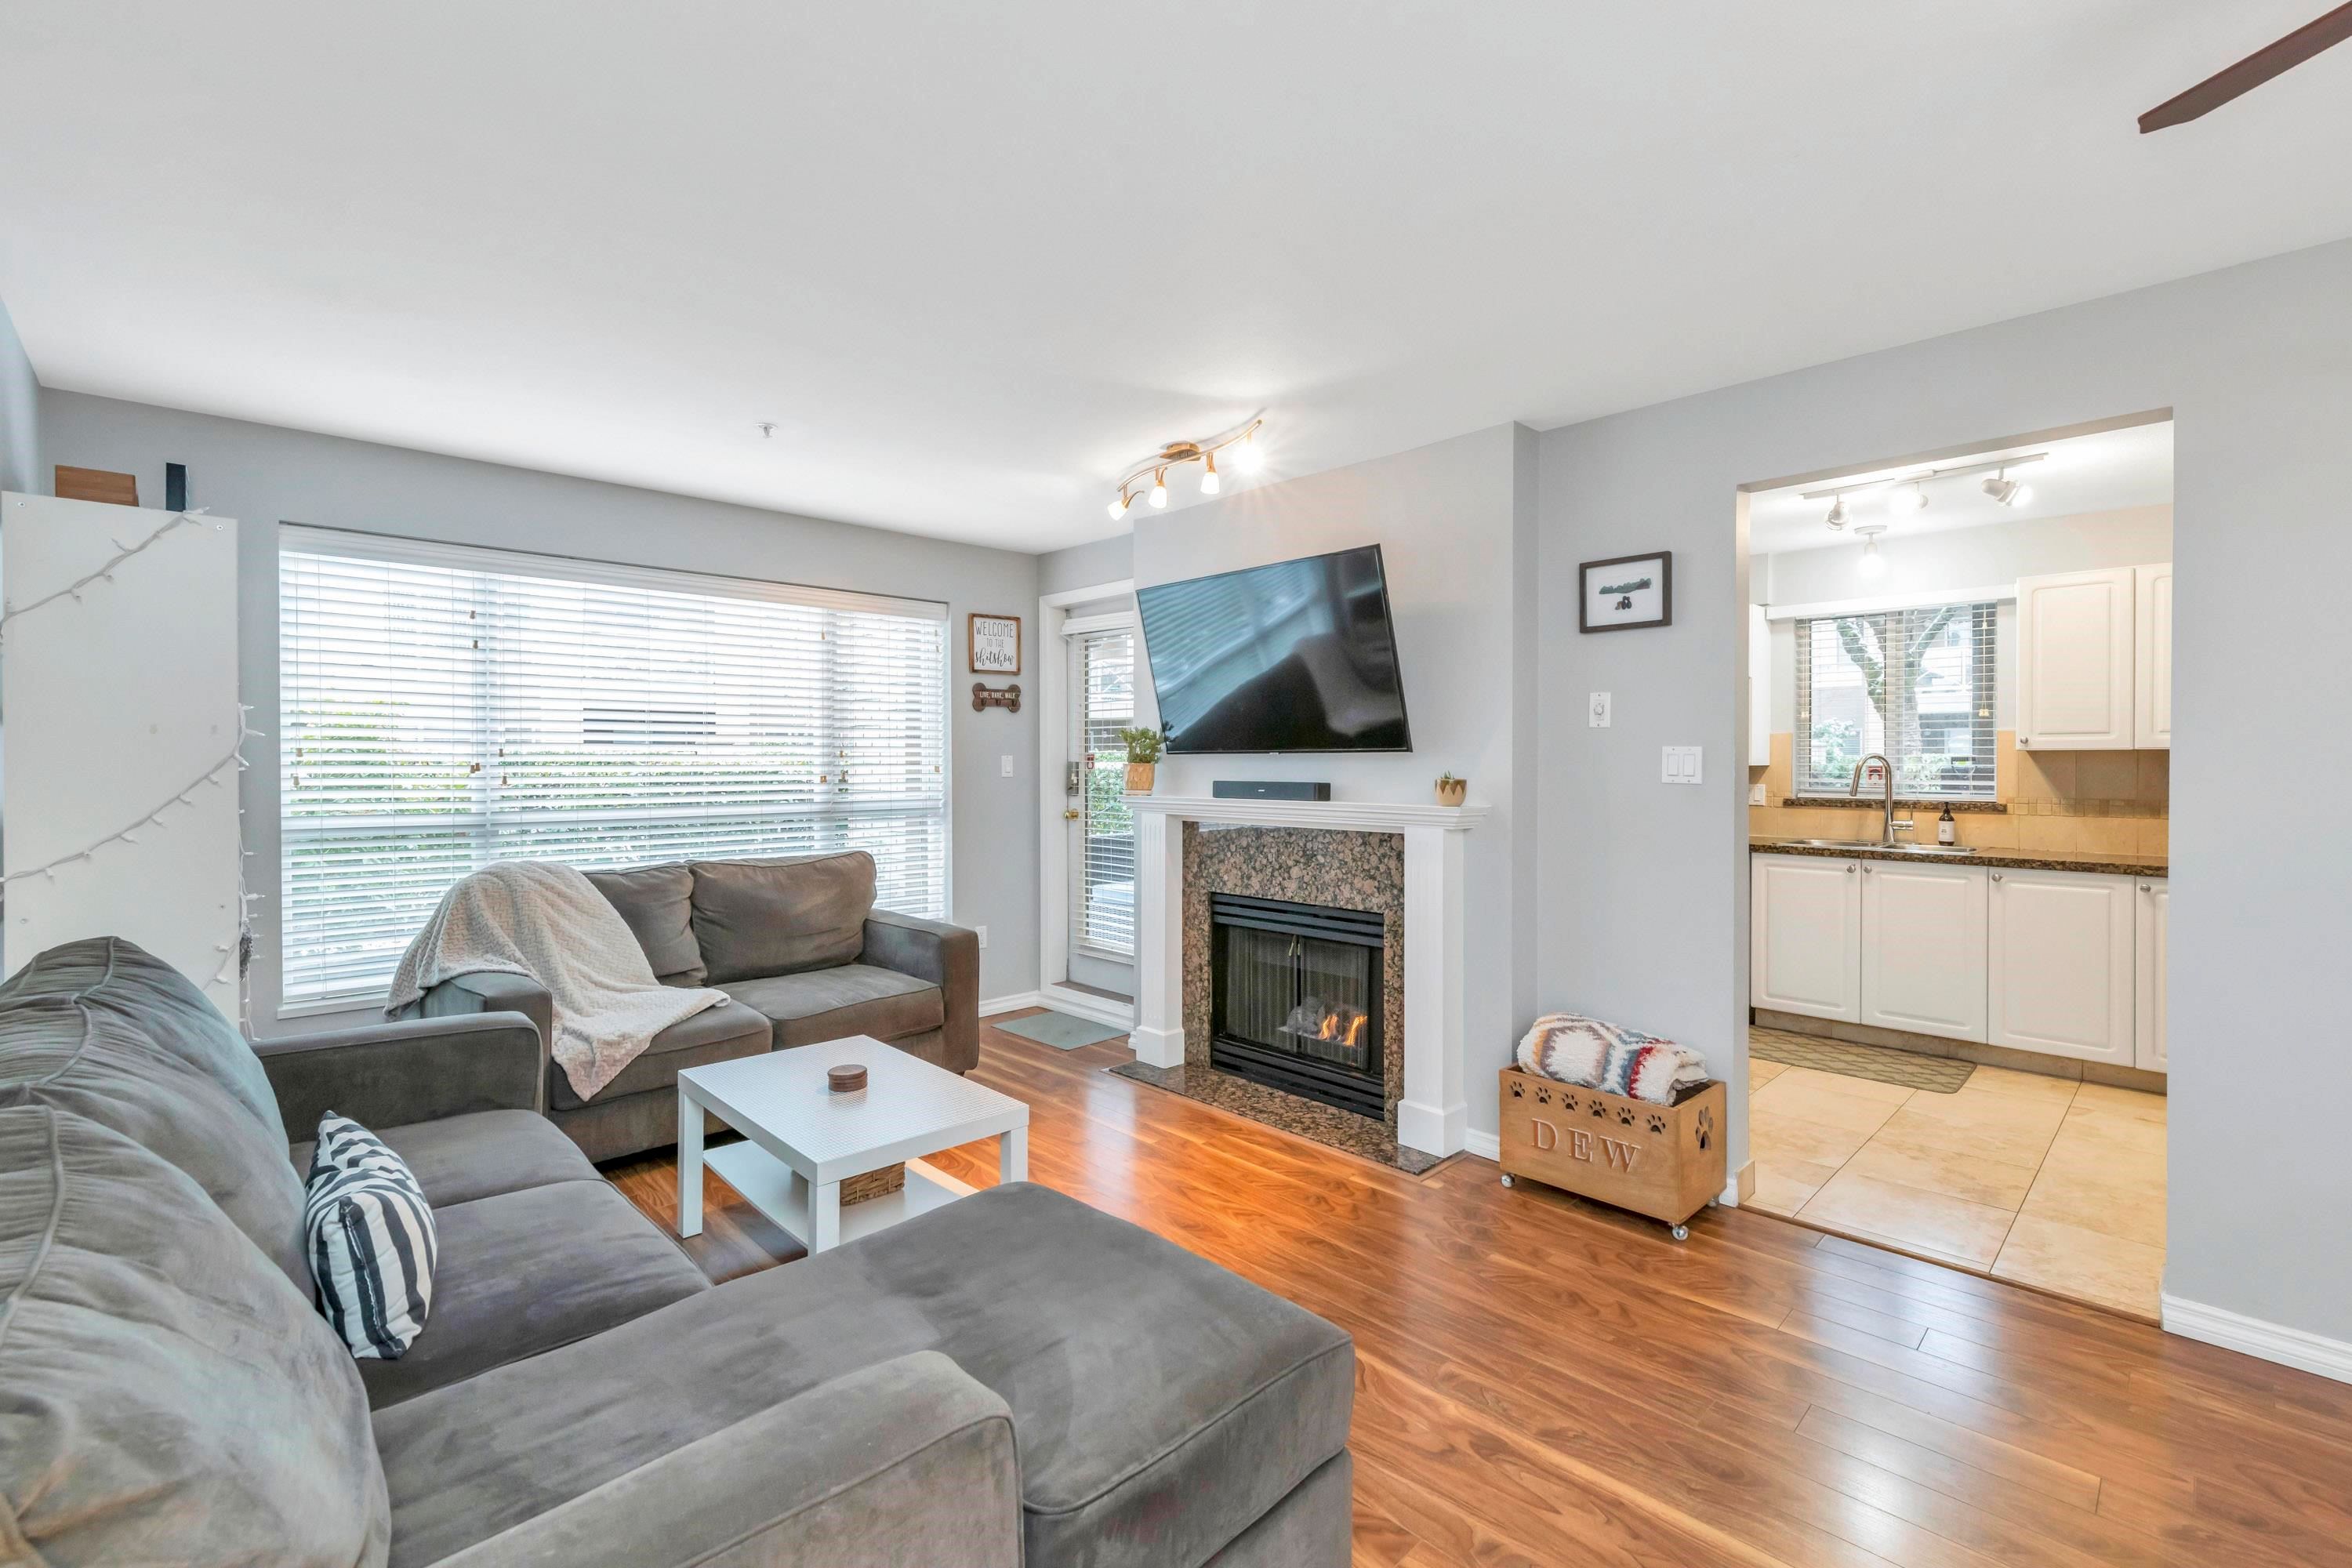 New property listed in Central Pt Coquitlam, Port Coquitlam